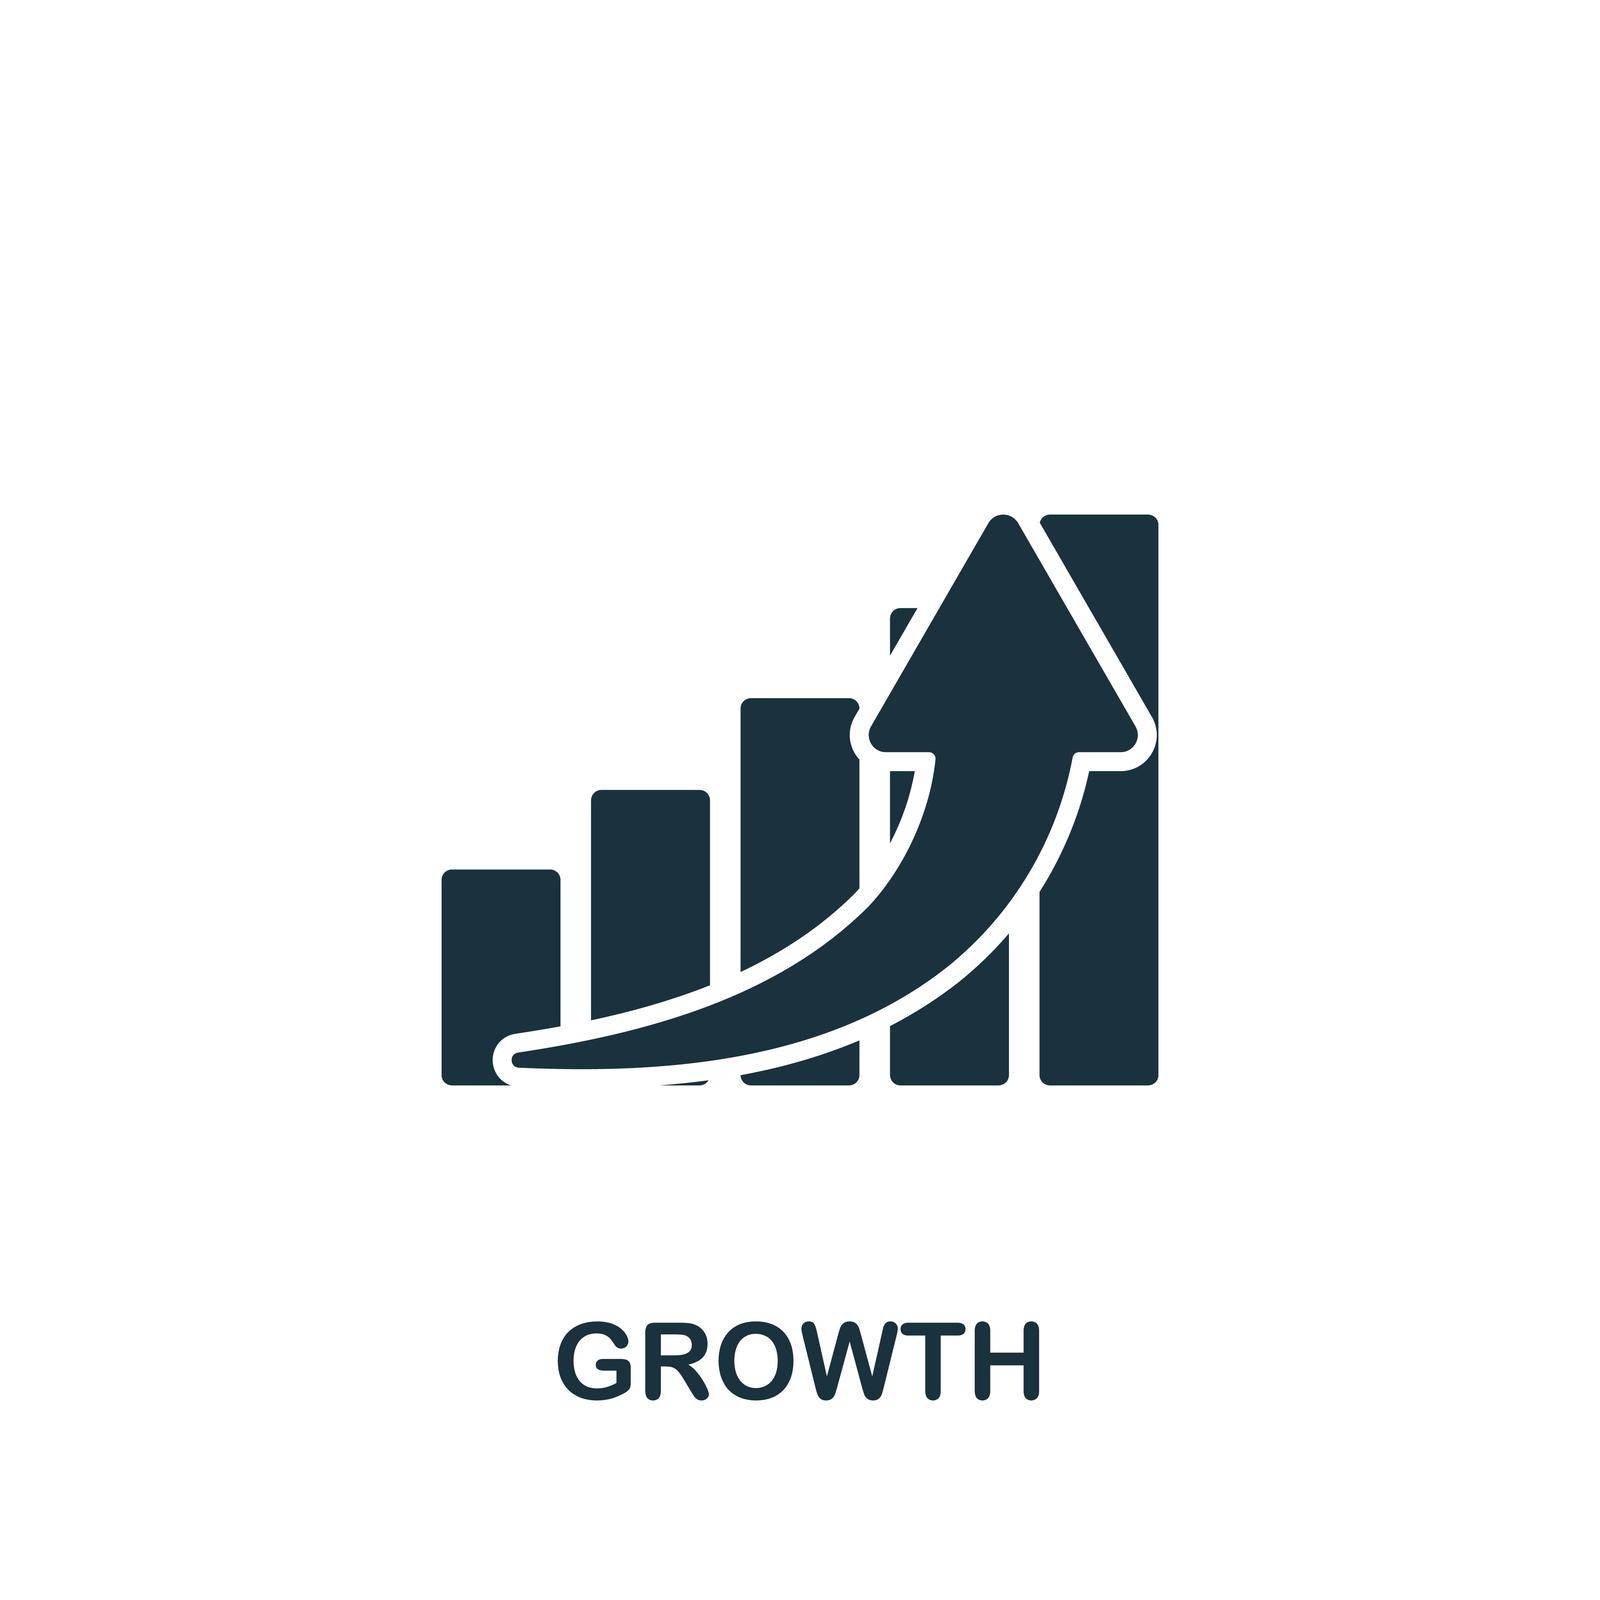 Growth icon. Simple line element business motivation symbol for templates, web design and infographics.